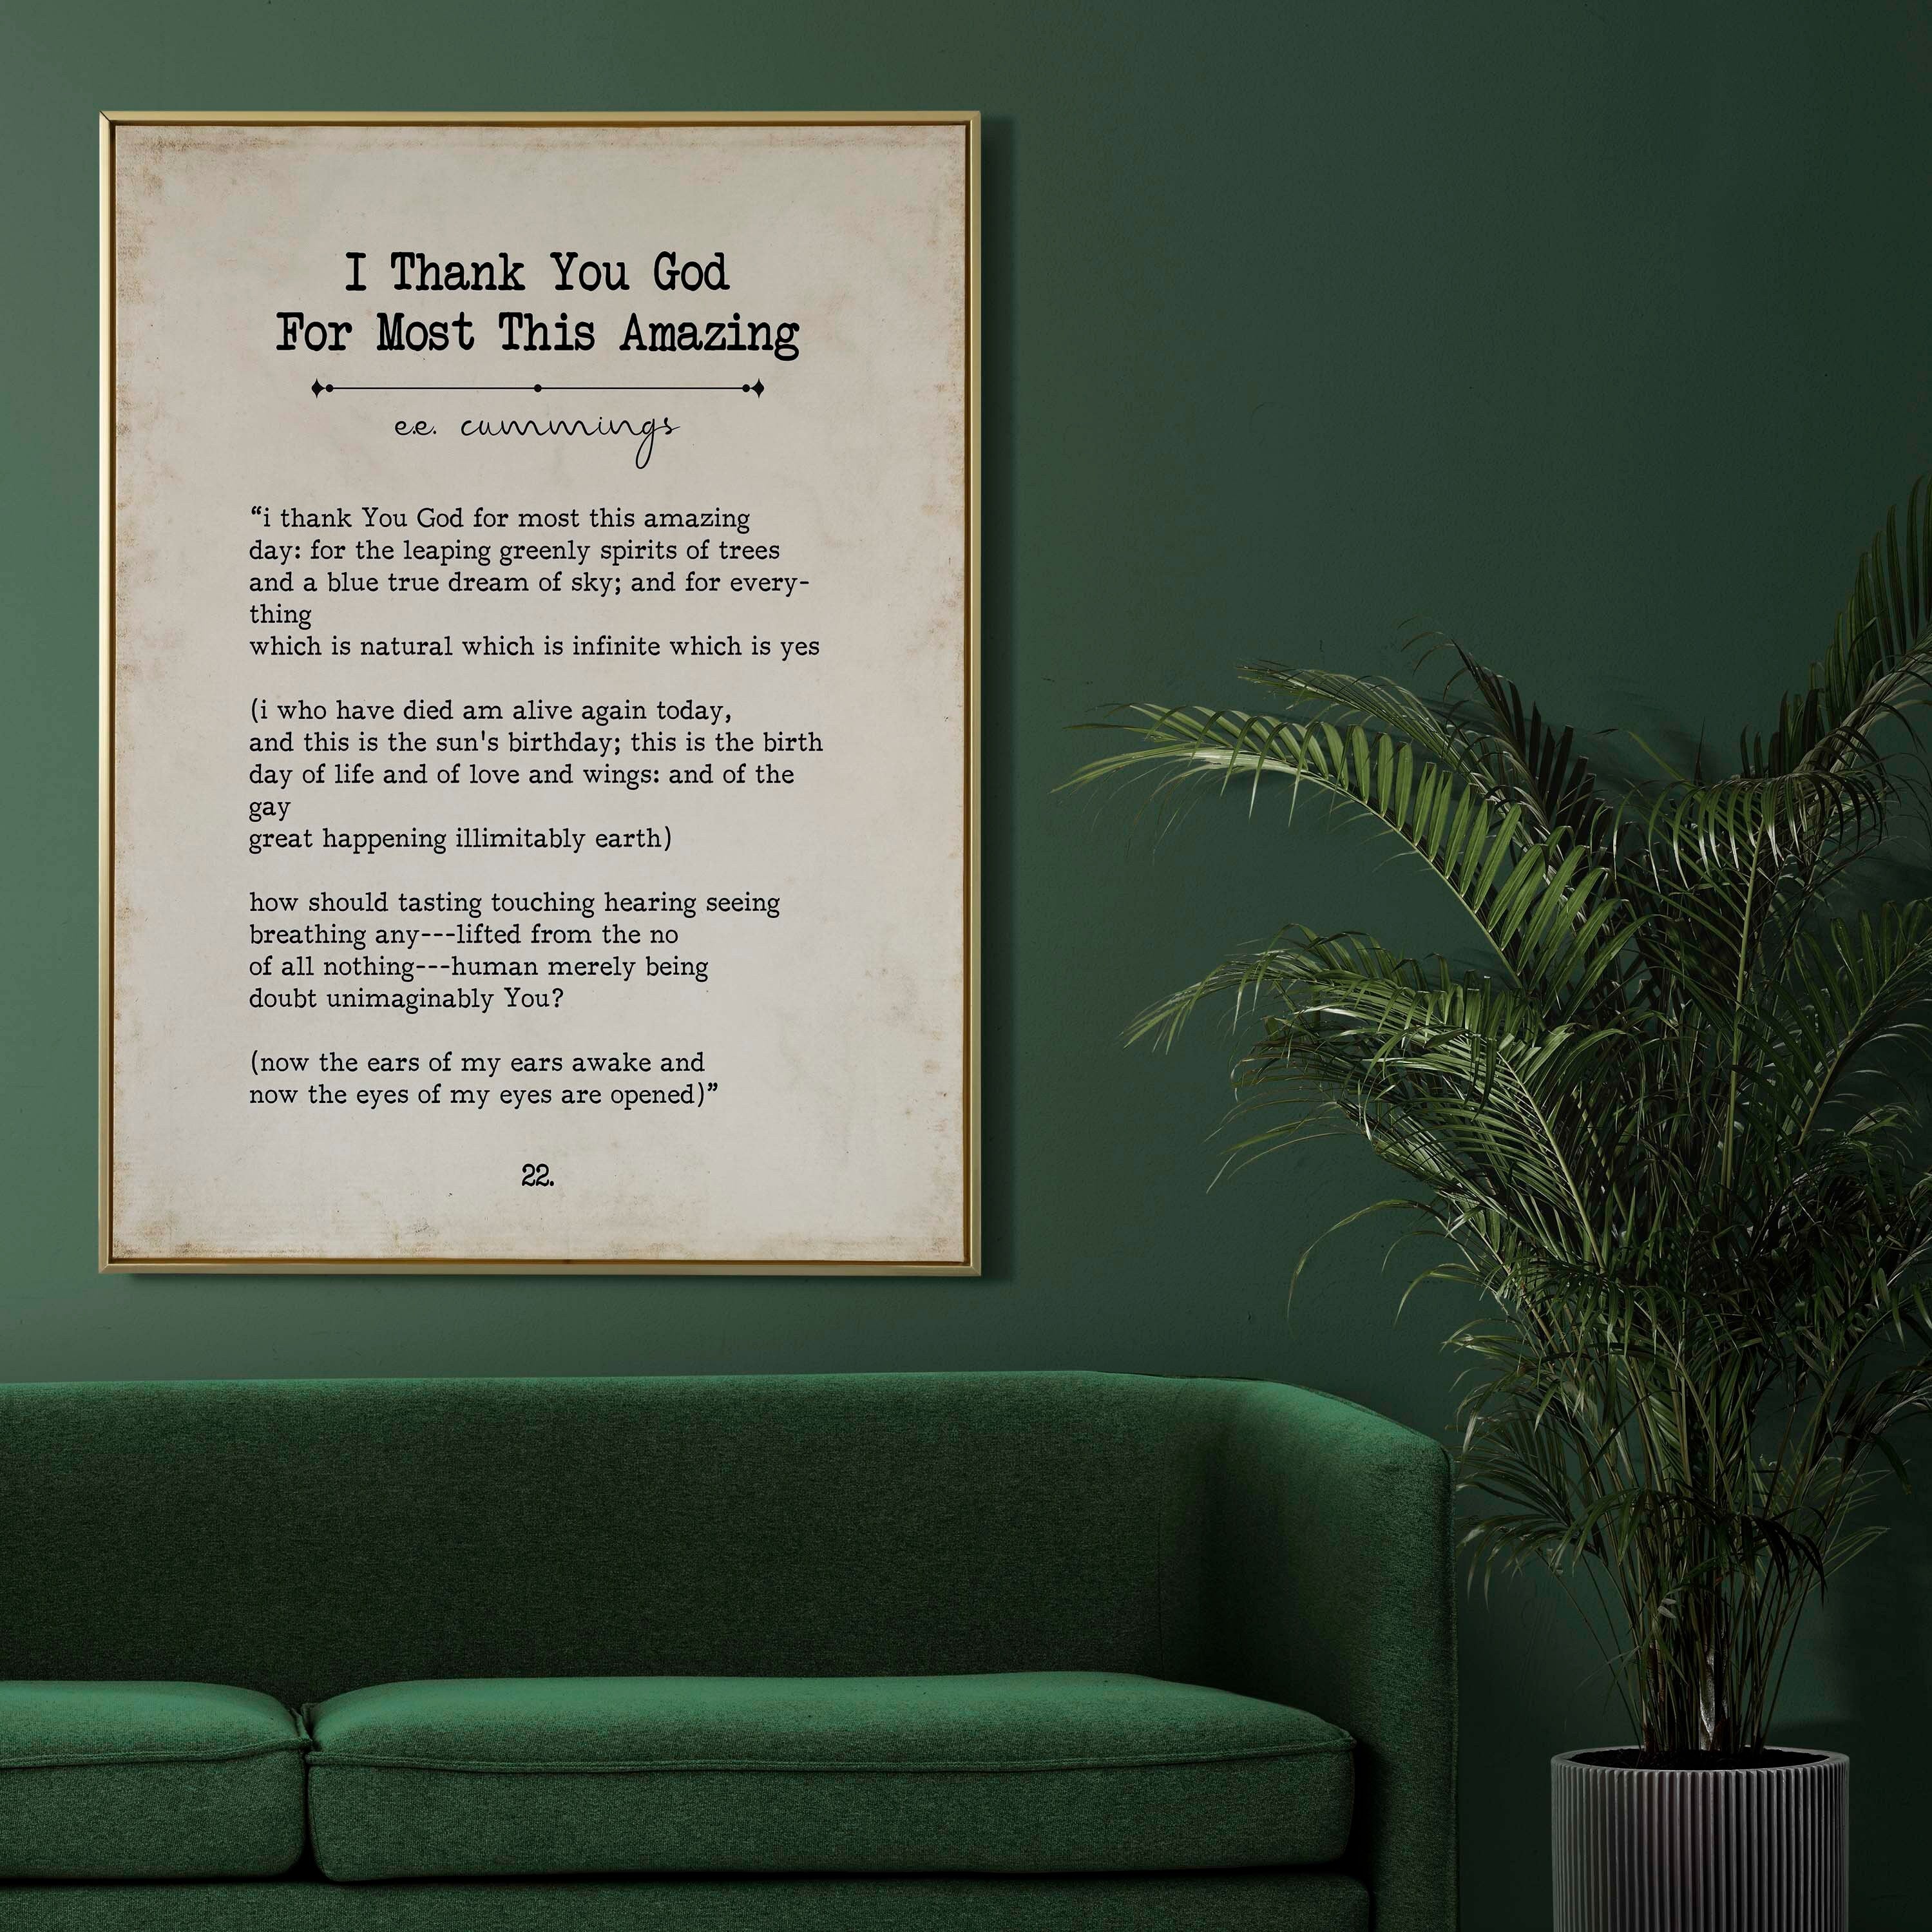 E E Cummings Book Page Inspirational Wall Art, i thank You God for most this amazing Poem Vintage Style Print Wall Decor